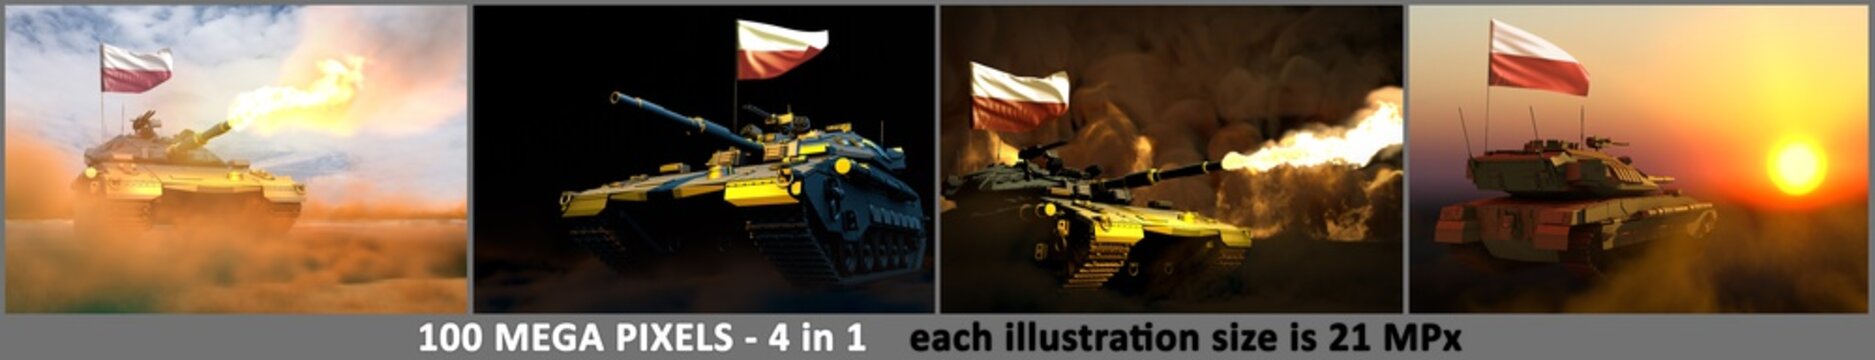 4 images of highly detailed tank with not real design and with Poland flag - Poland army concept with place for your content, military 3D Illustration